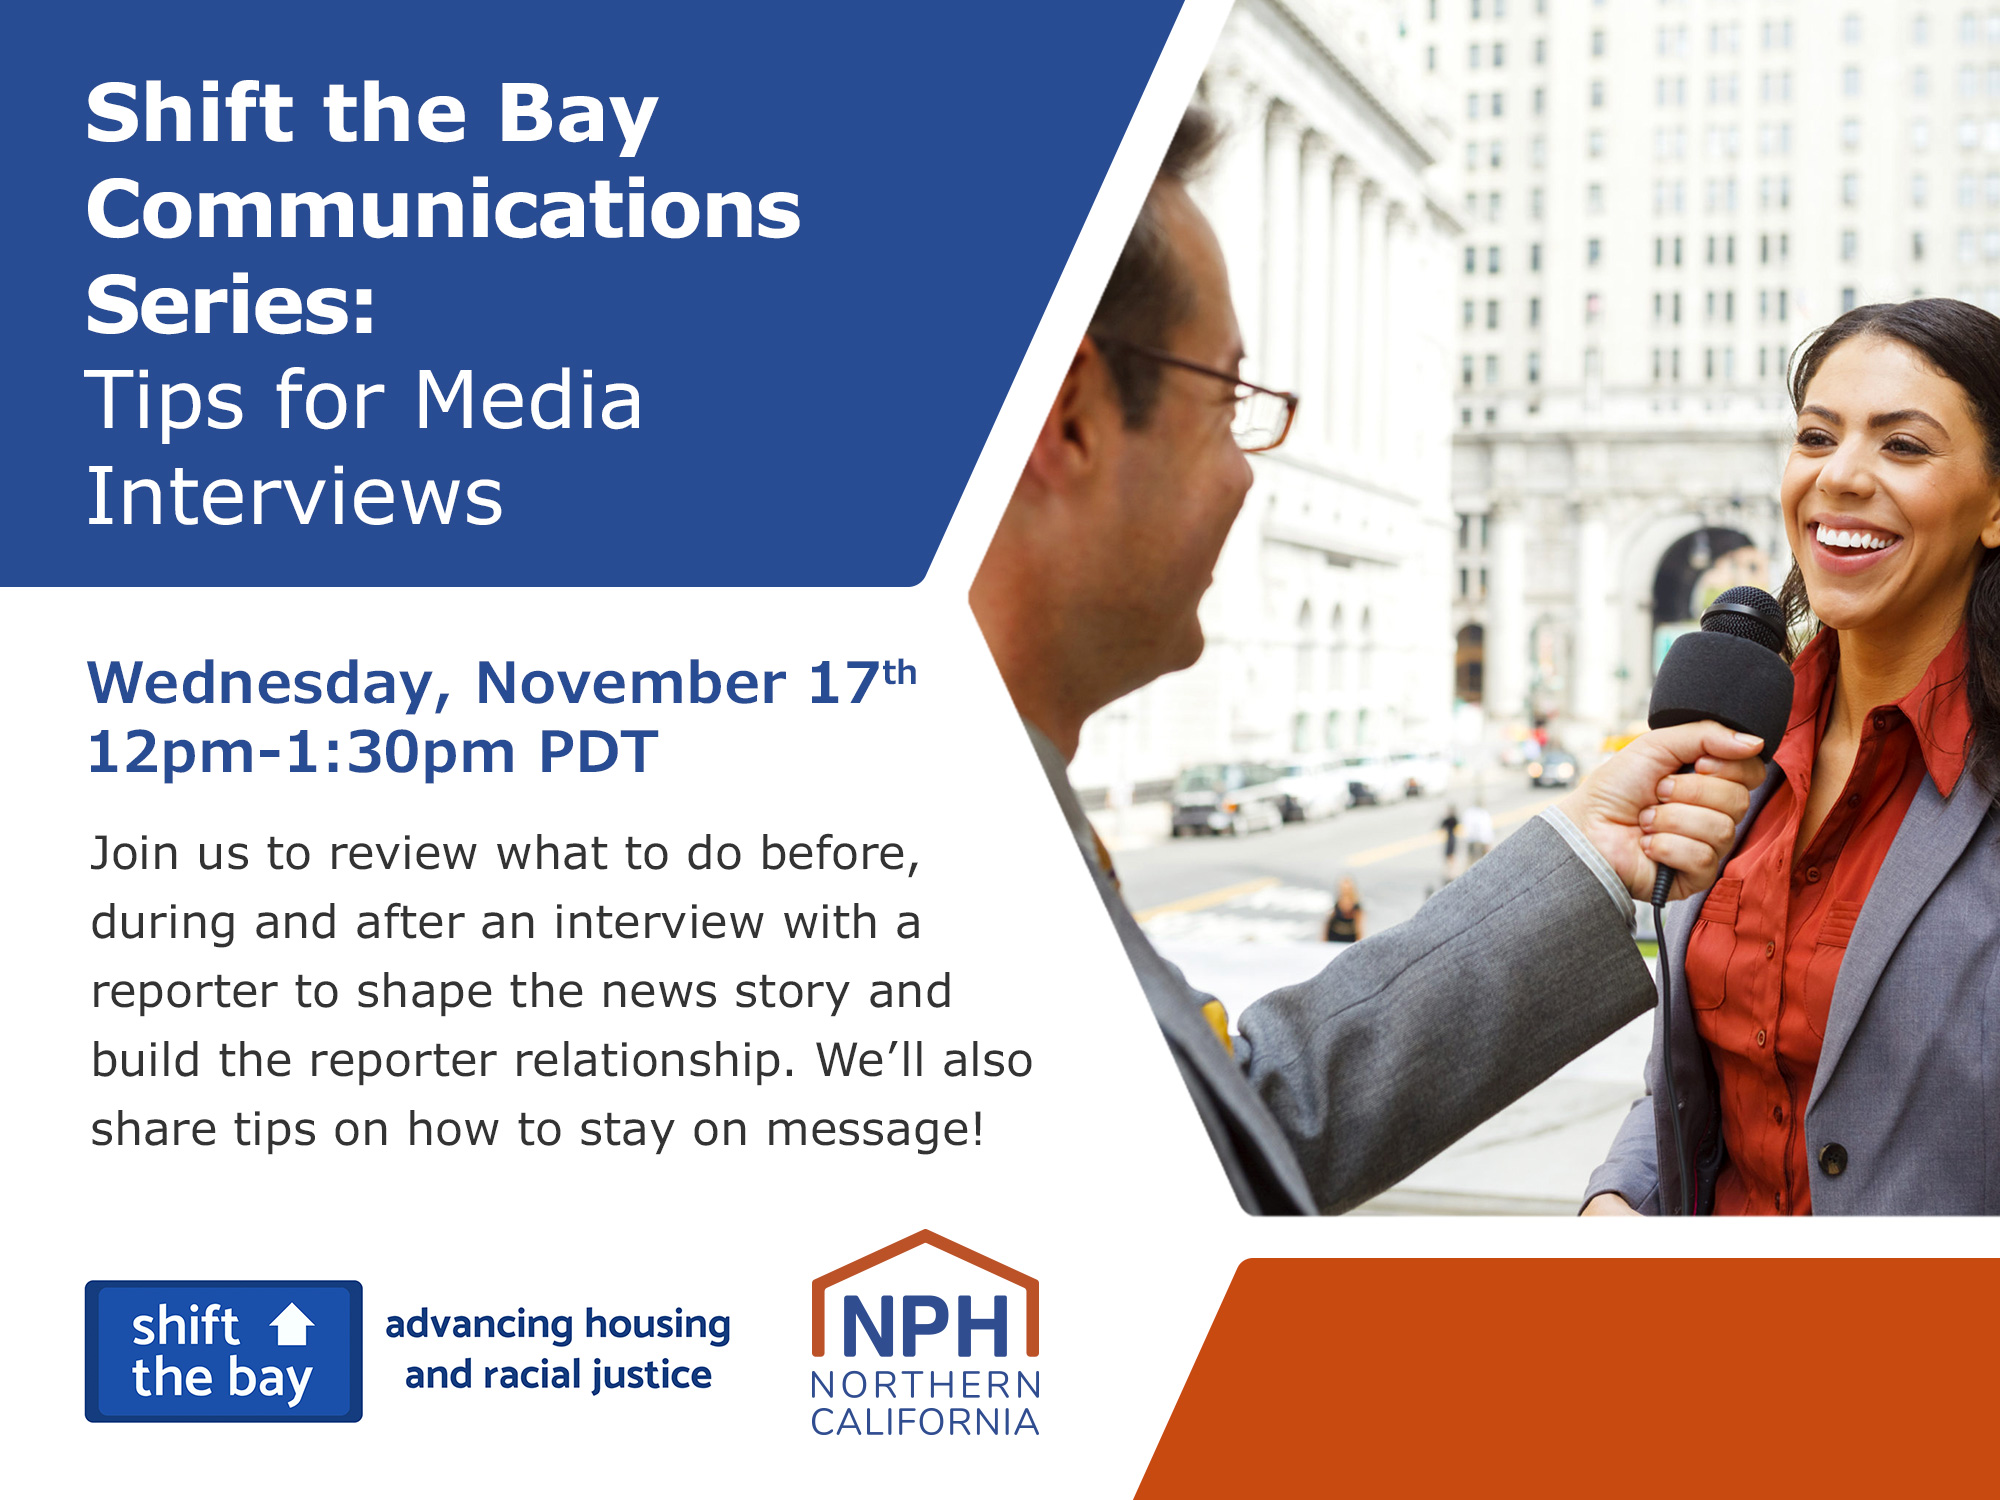 Image of event flyer featuring event information and photo of person being interviewed